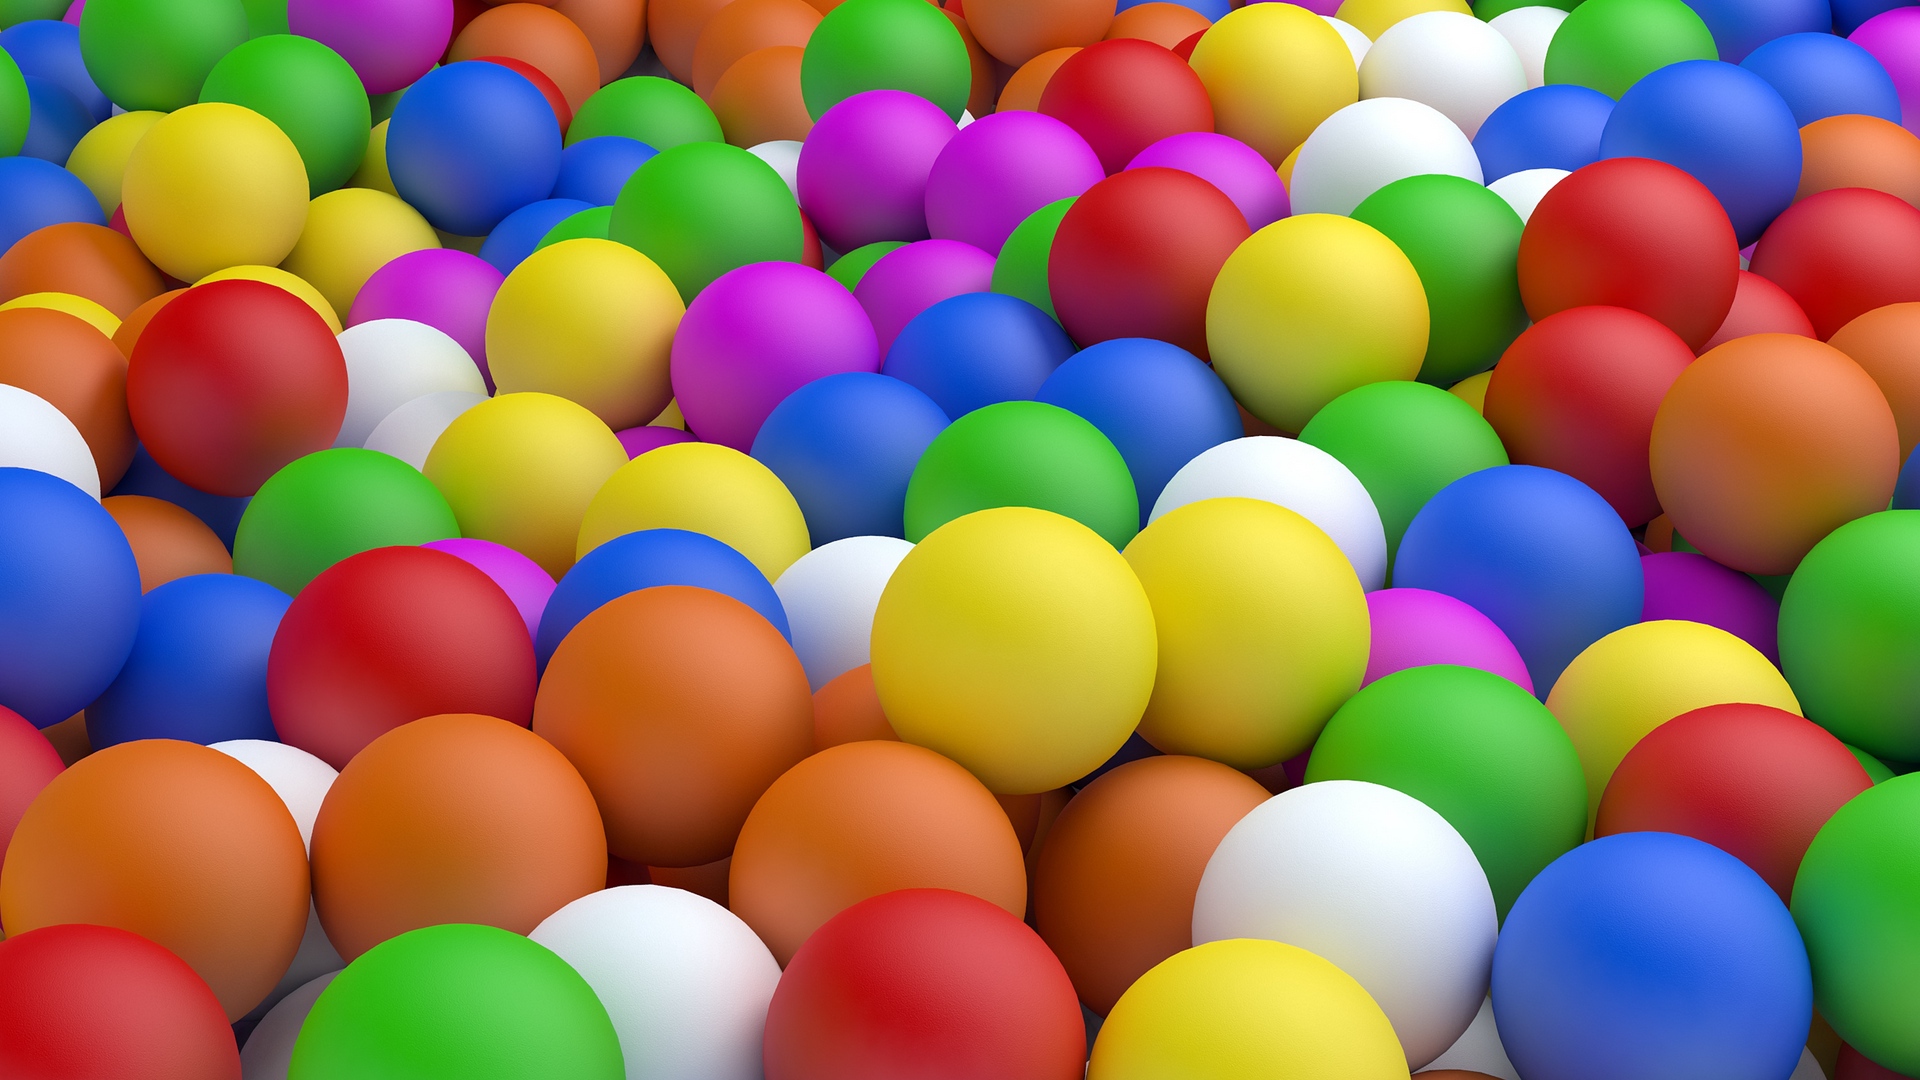 full hd wallpapers 1920x1080,ball pit,easter egg,ball,food,colorfulness